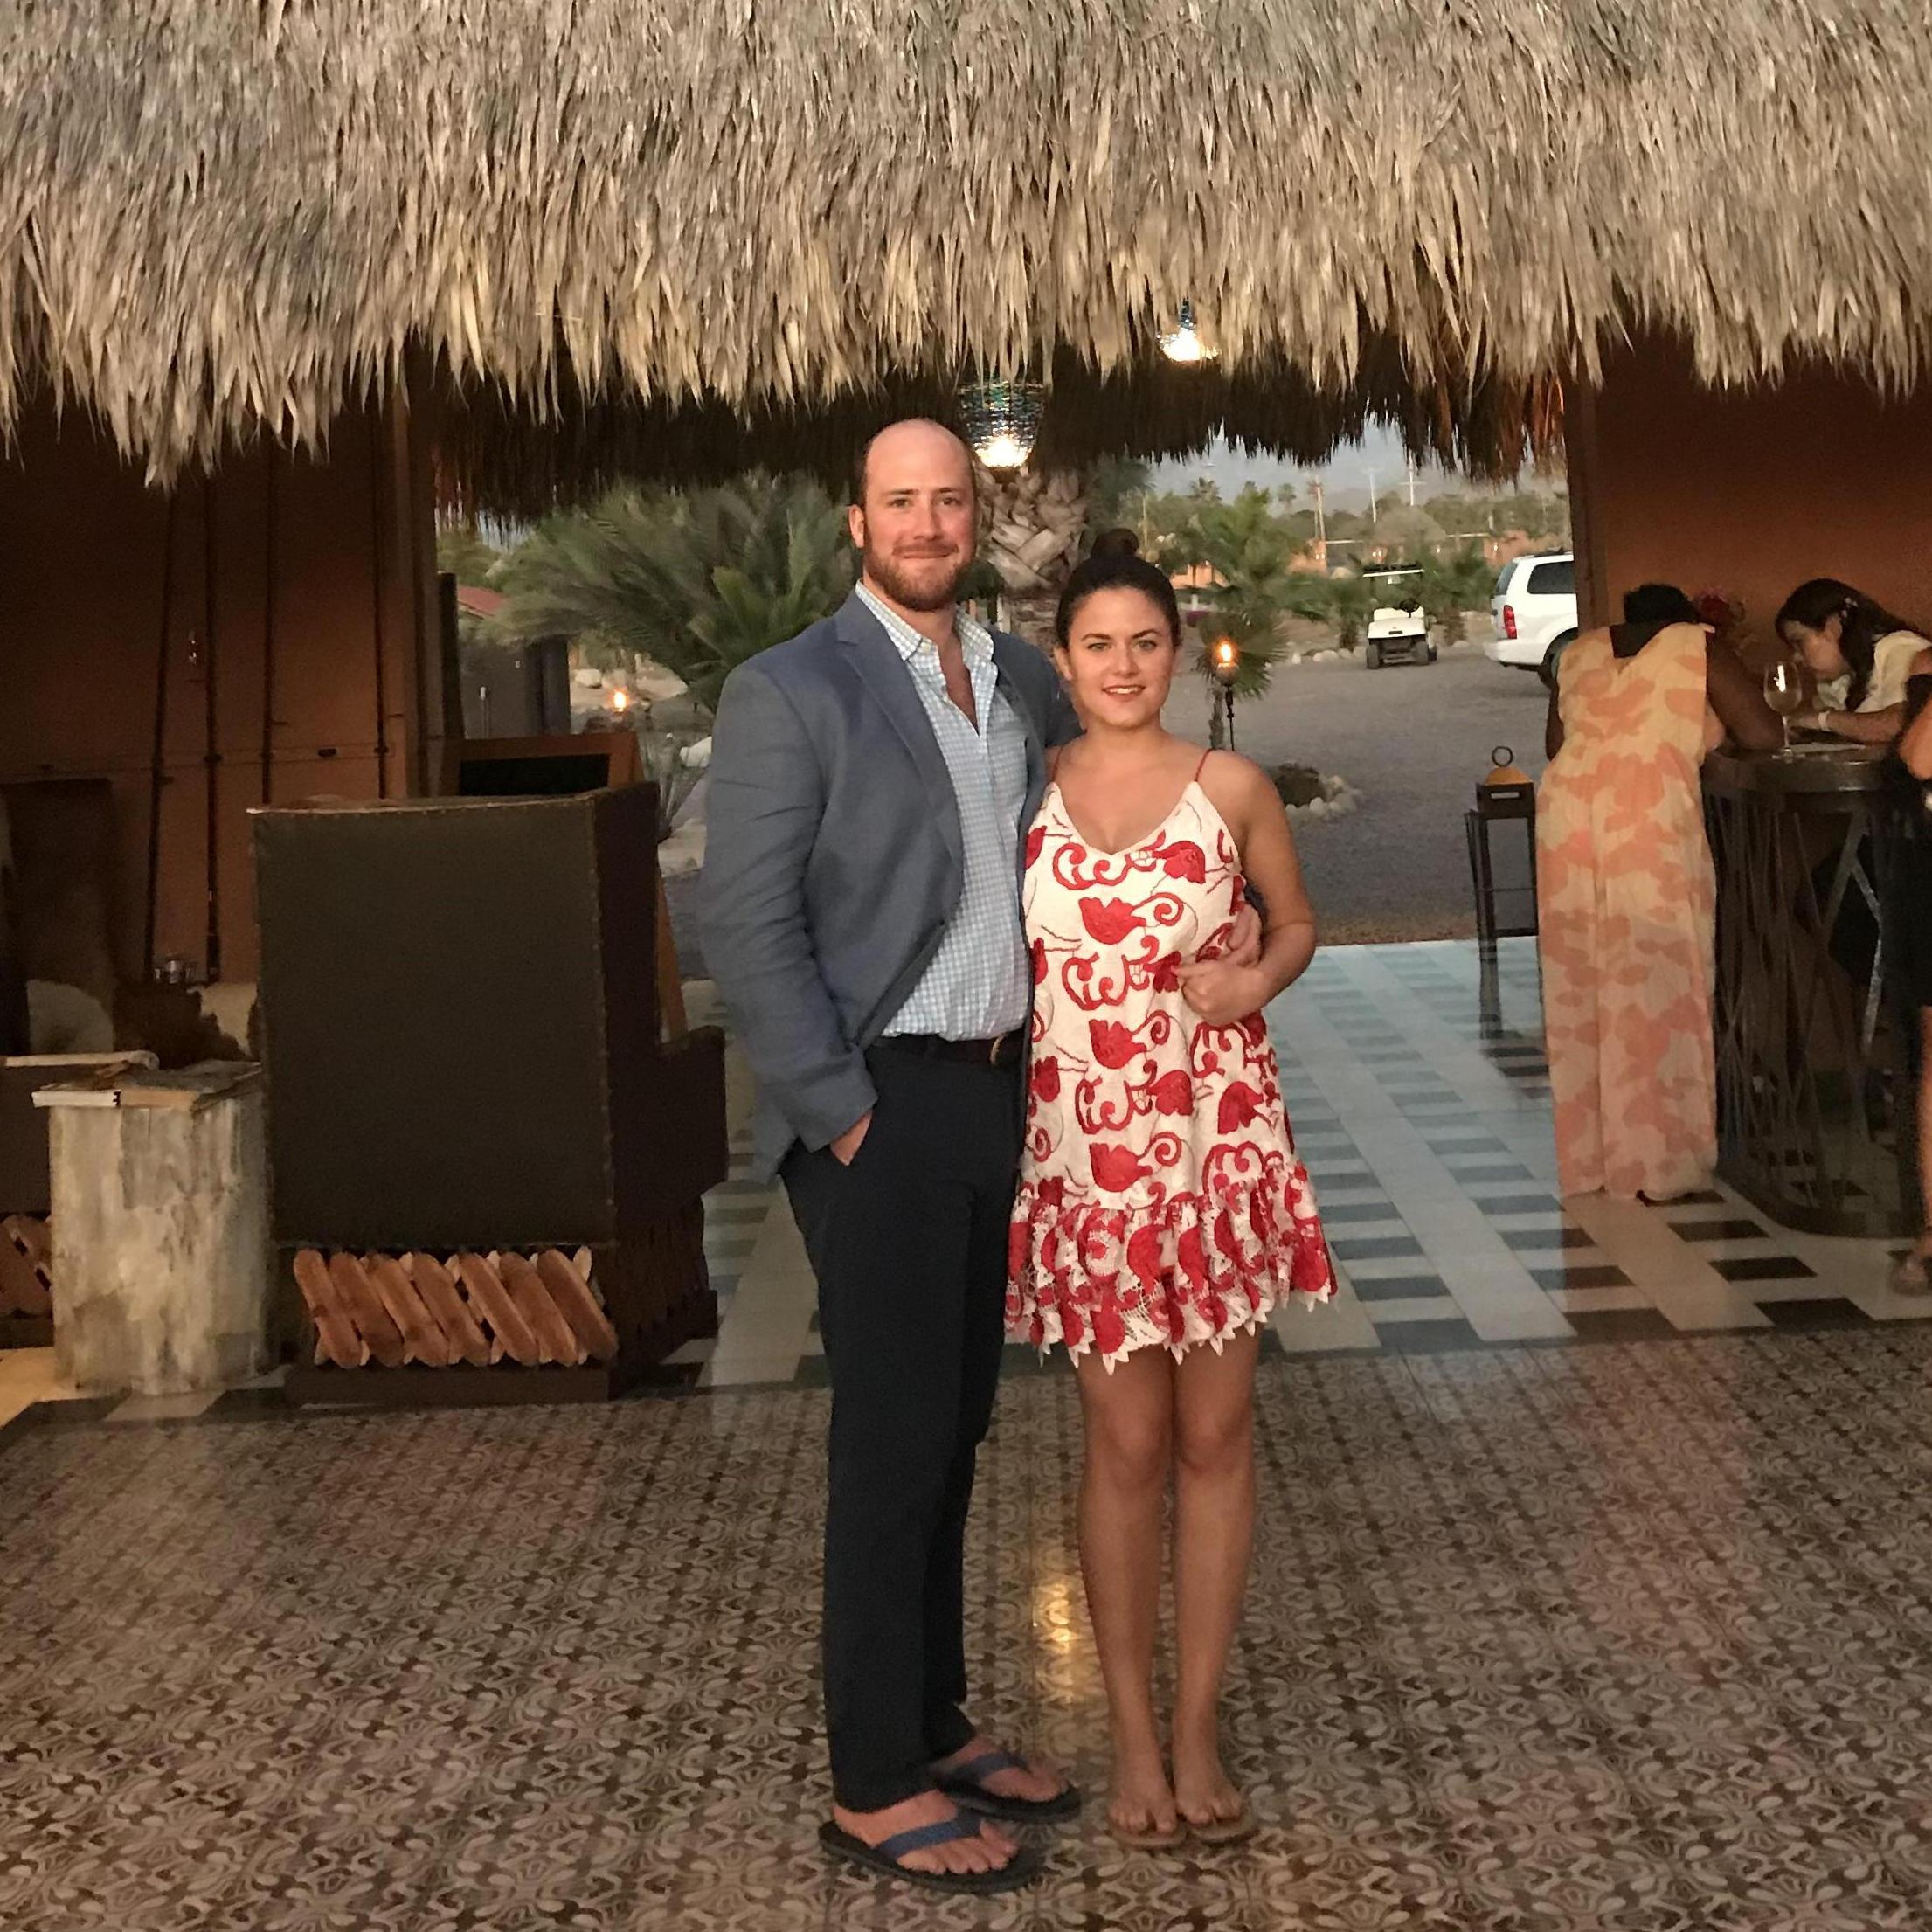 Our first trip together - viva la Mexico!